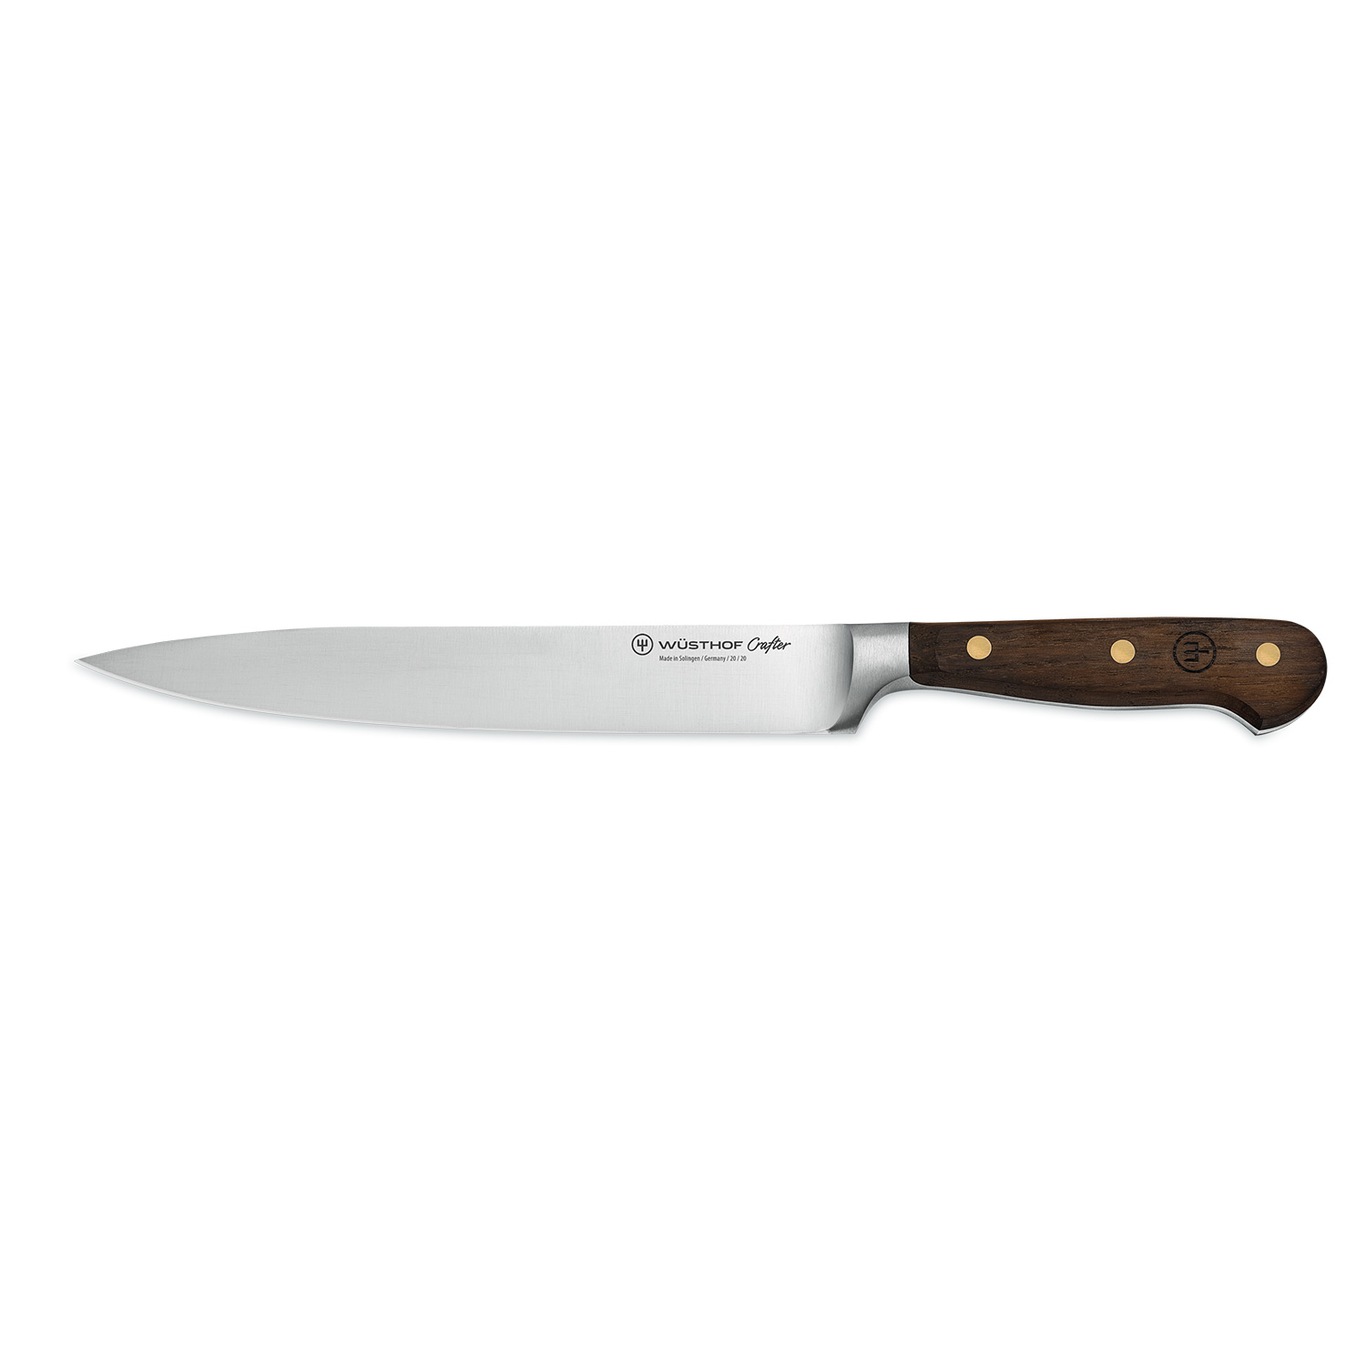 Crafter Carving Knife, 20 cm